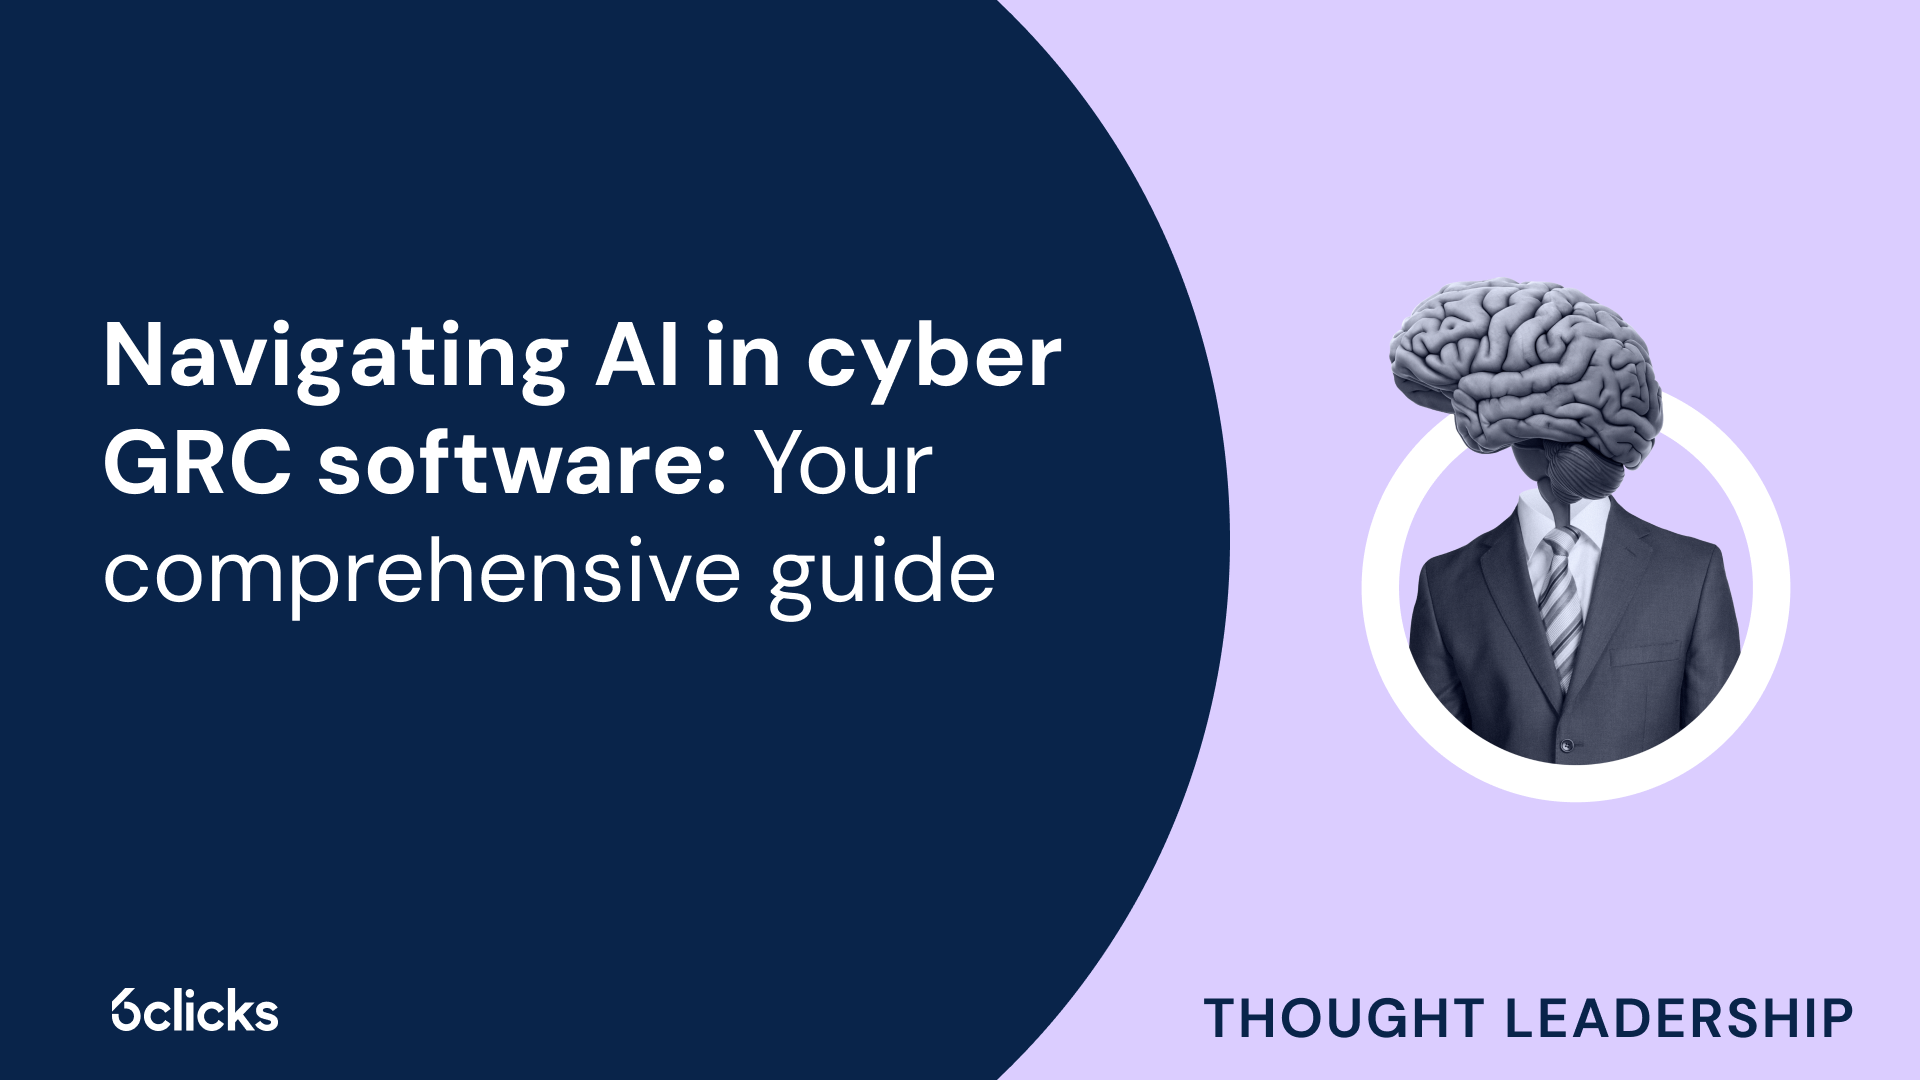 Navigating AI in cyber GRC software: Your comprehensive guide